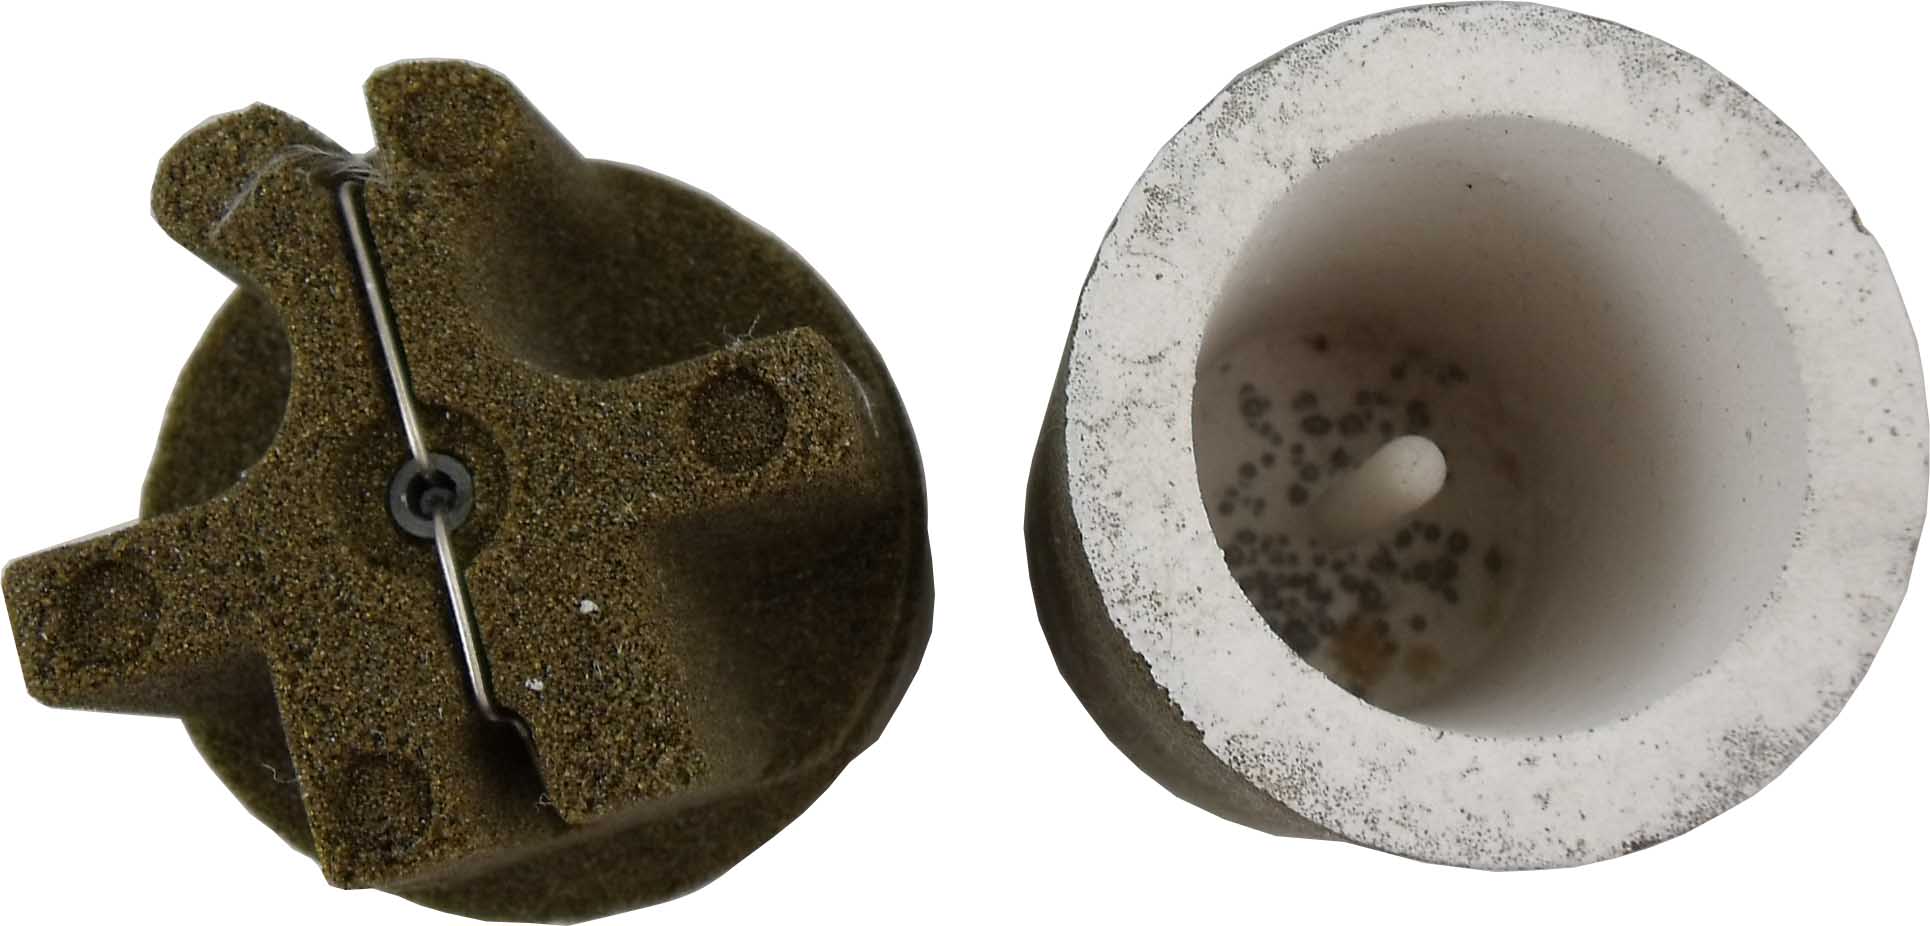 thermal analysis carbon cup for iron casting analysis